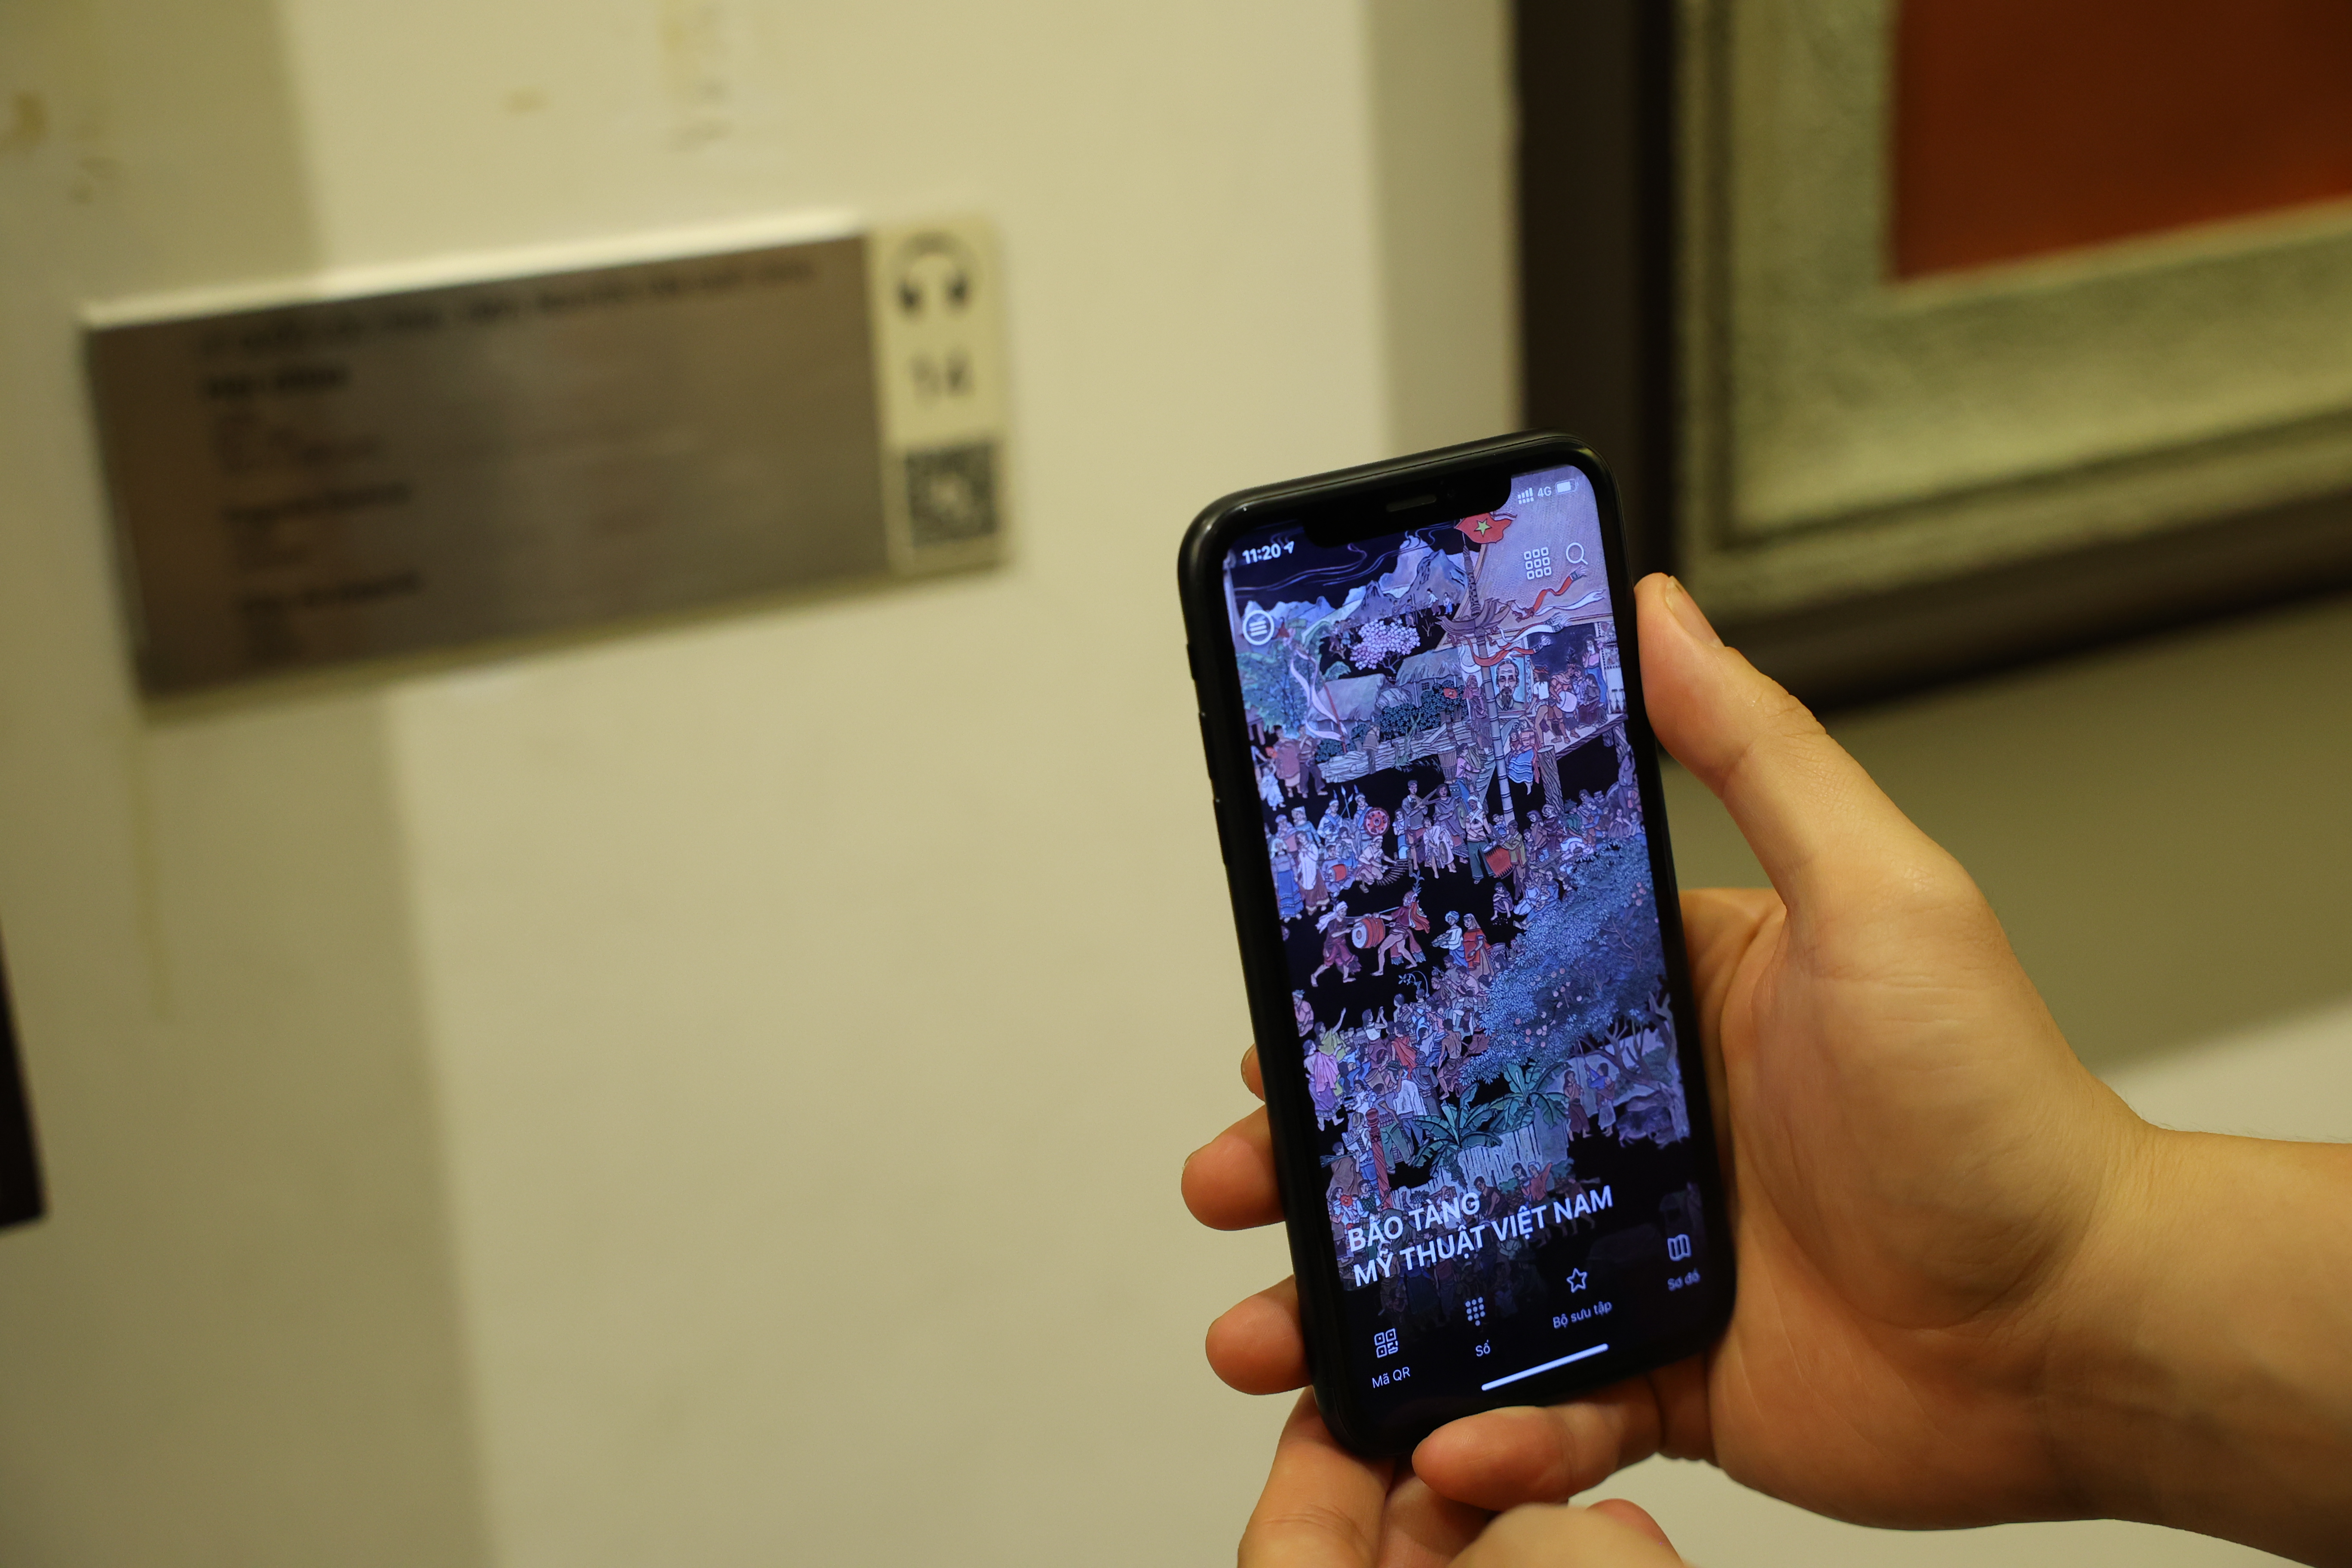 A visitor accesses iMuseum VFA, an application that supports users to find information about artworks displayed and stored at the Vietnam Fine Arts Museum in Hanoi, in this supplied photo.